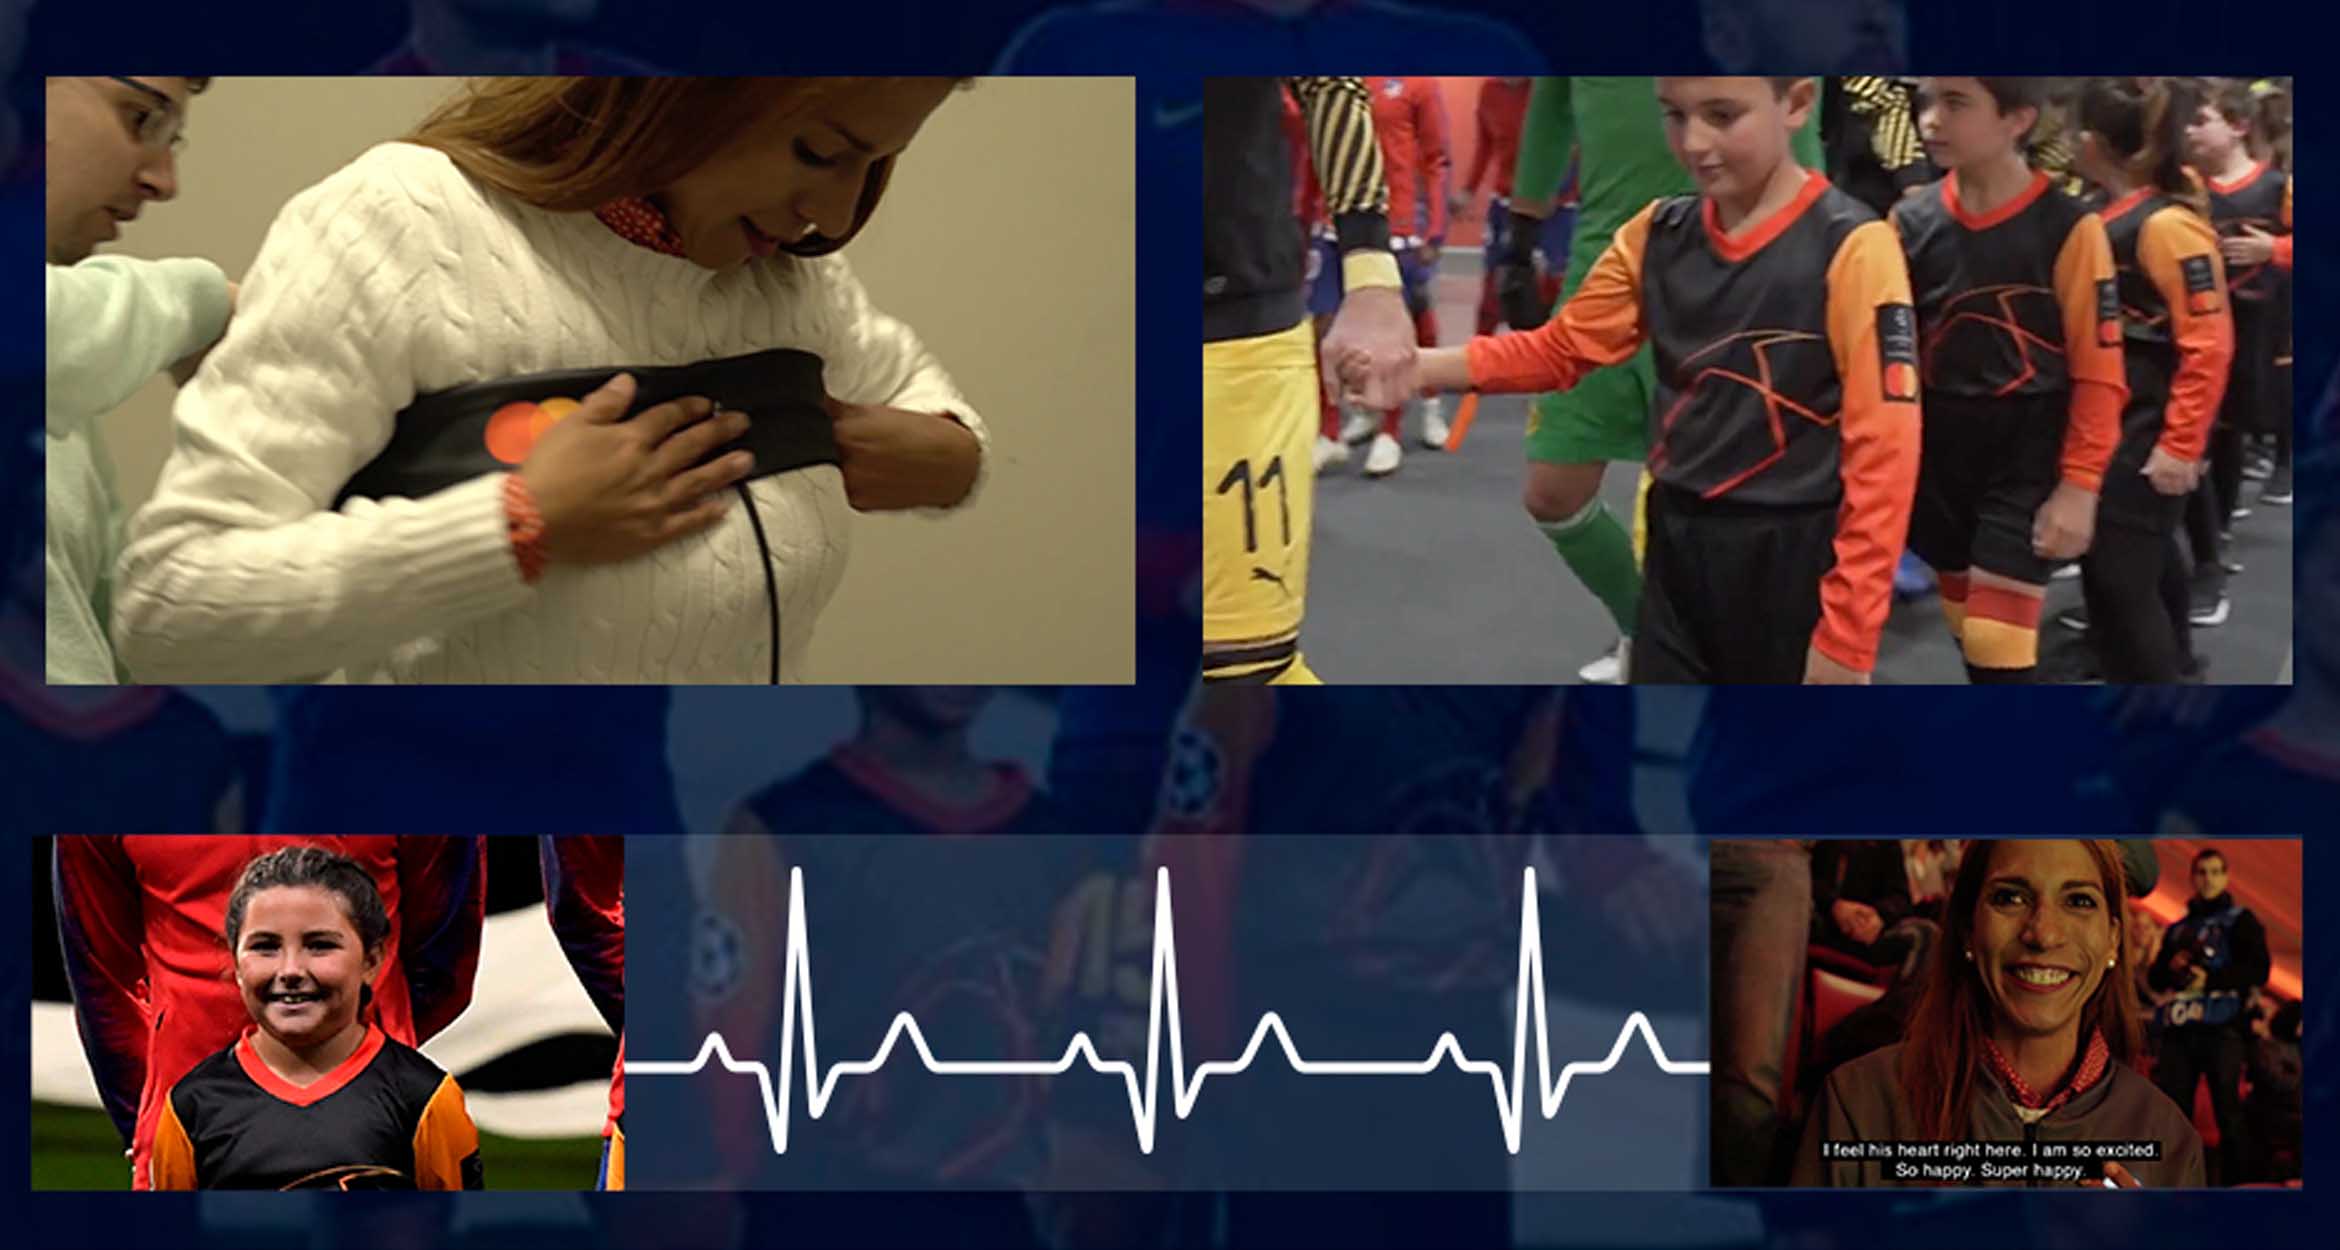 Collage of children wearing Kit Beats jerseys, their parents, and heartbeat vectors 